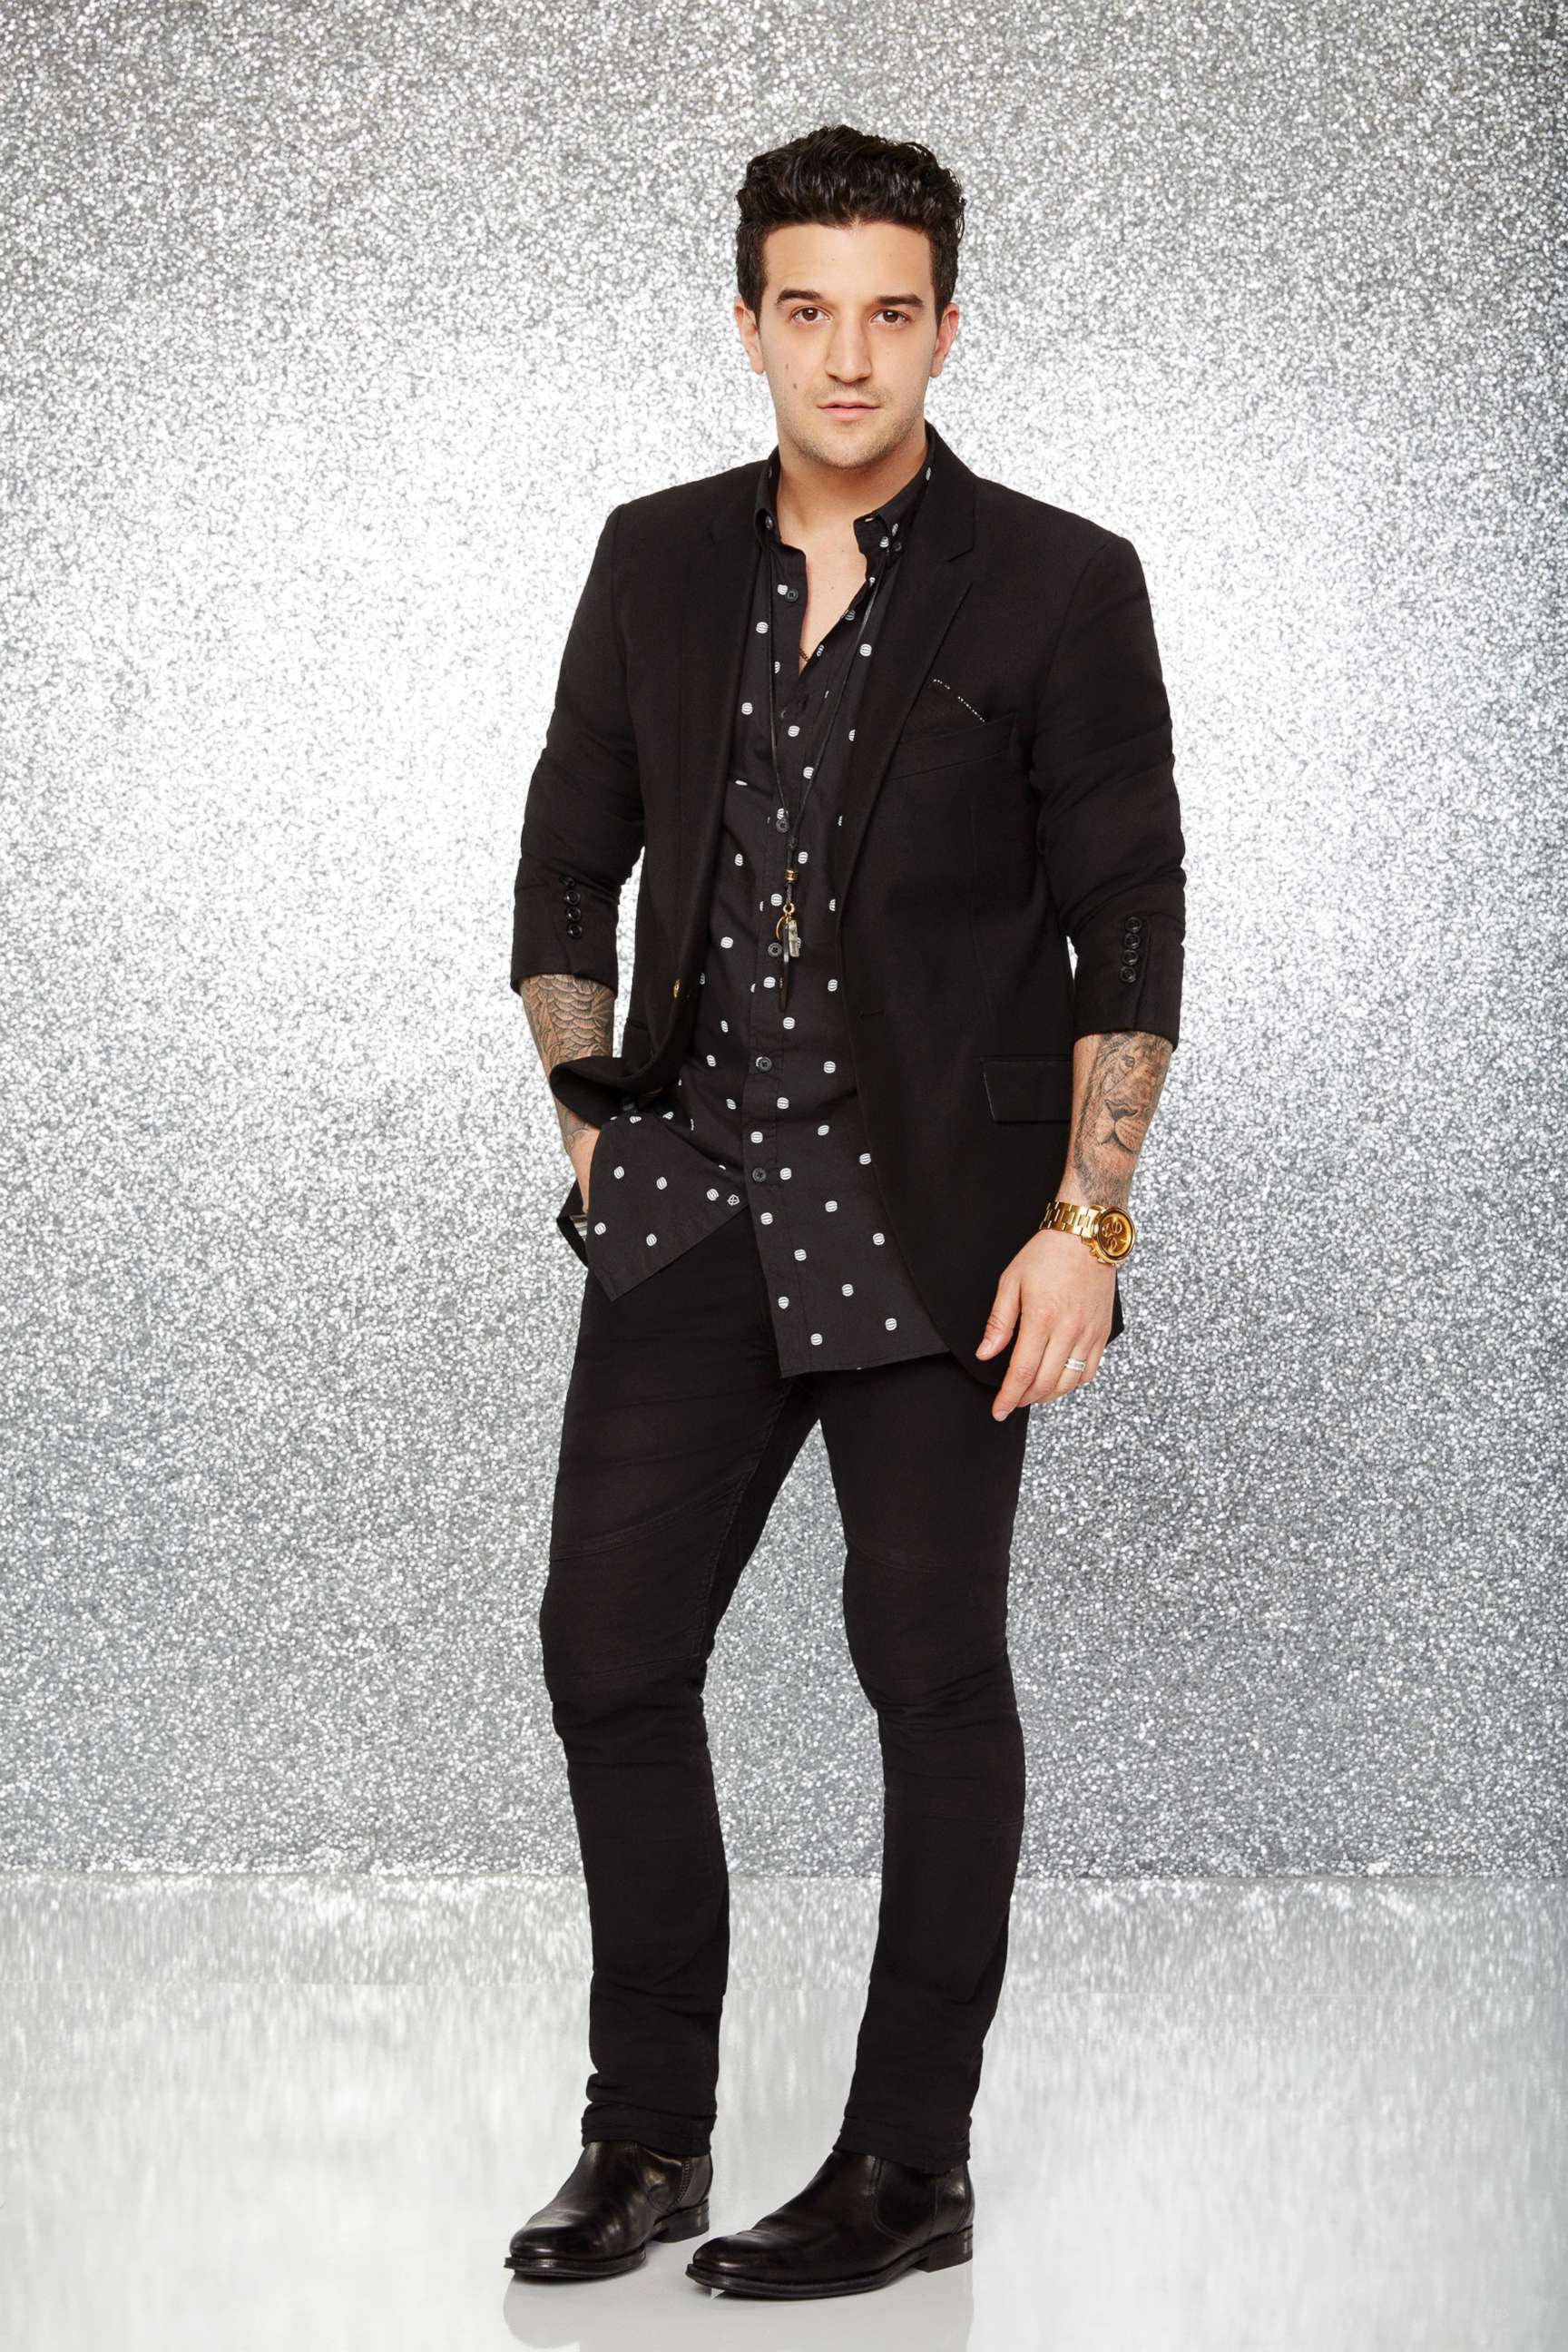 PHOTO: Pro dancer Mark Ballas will appear on "Dancing With The Stars."